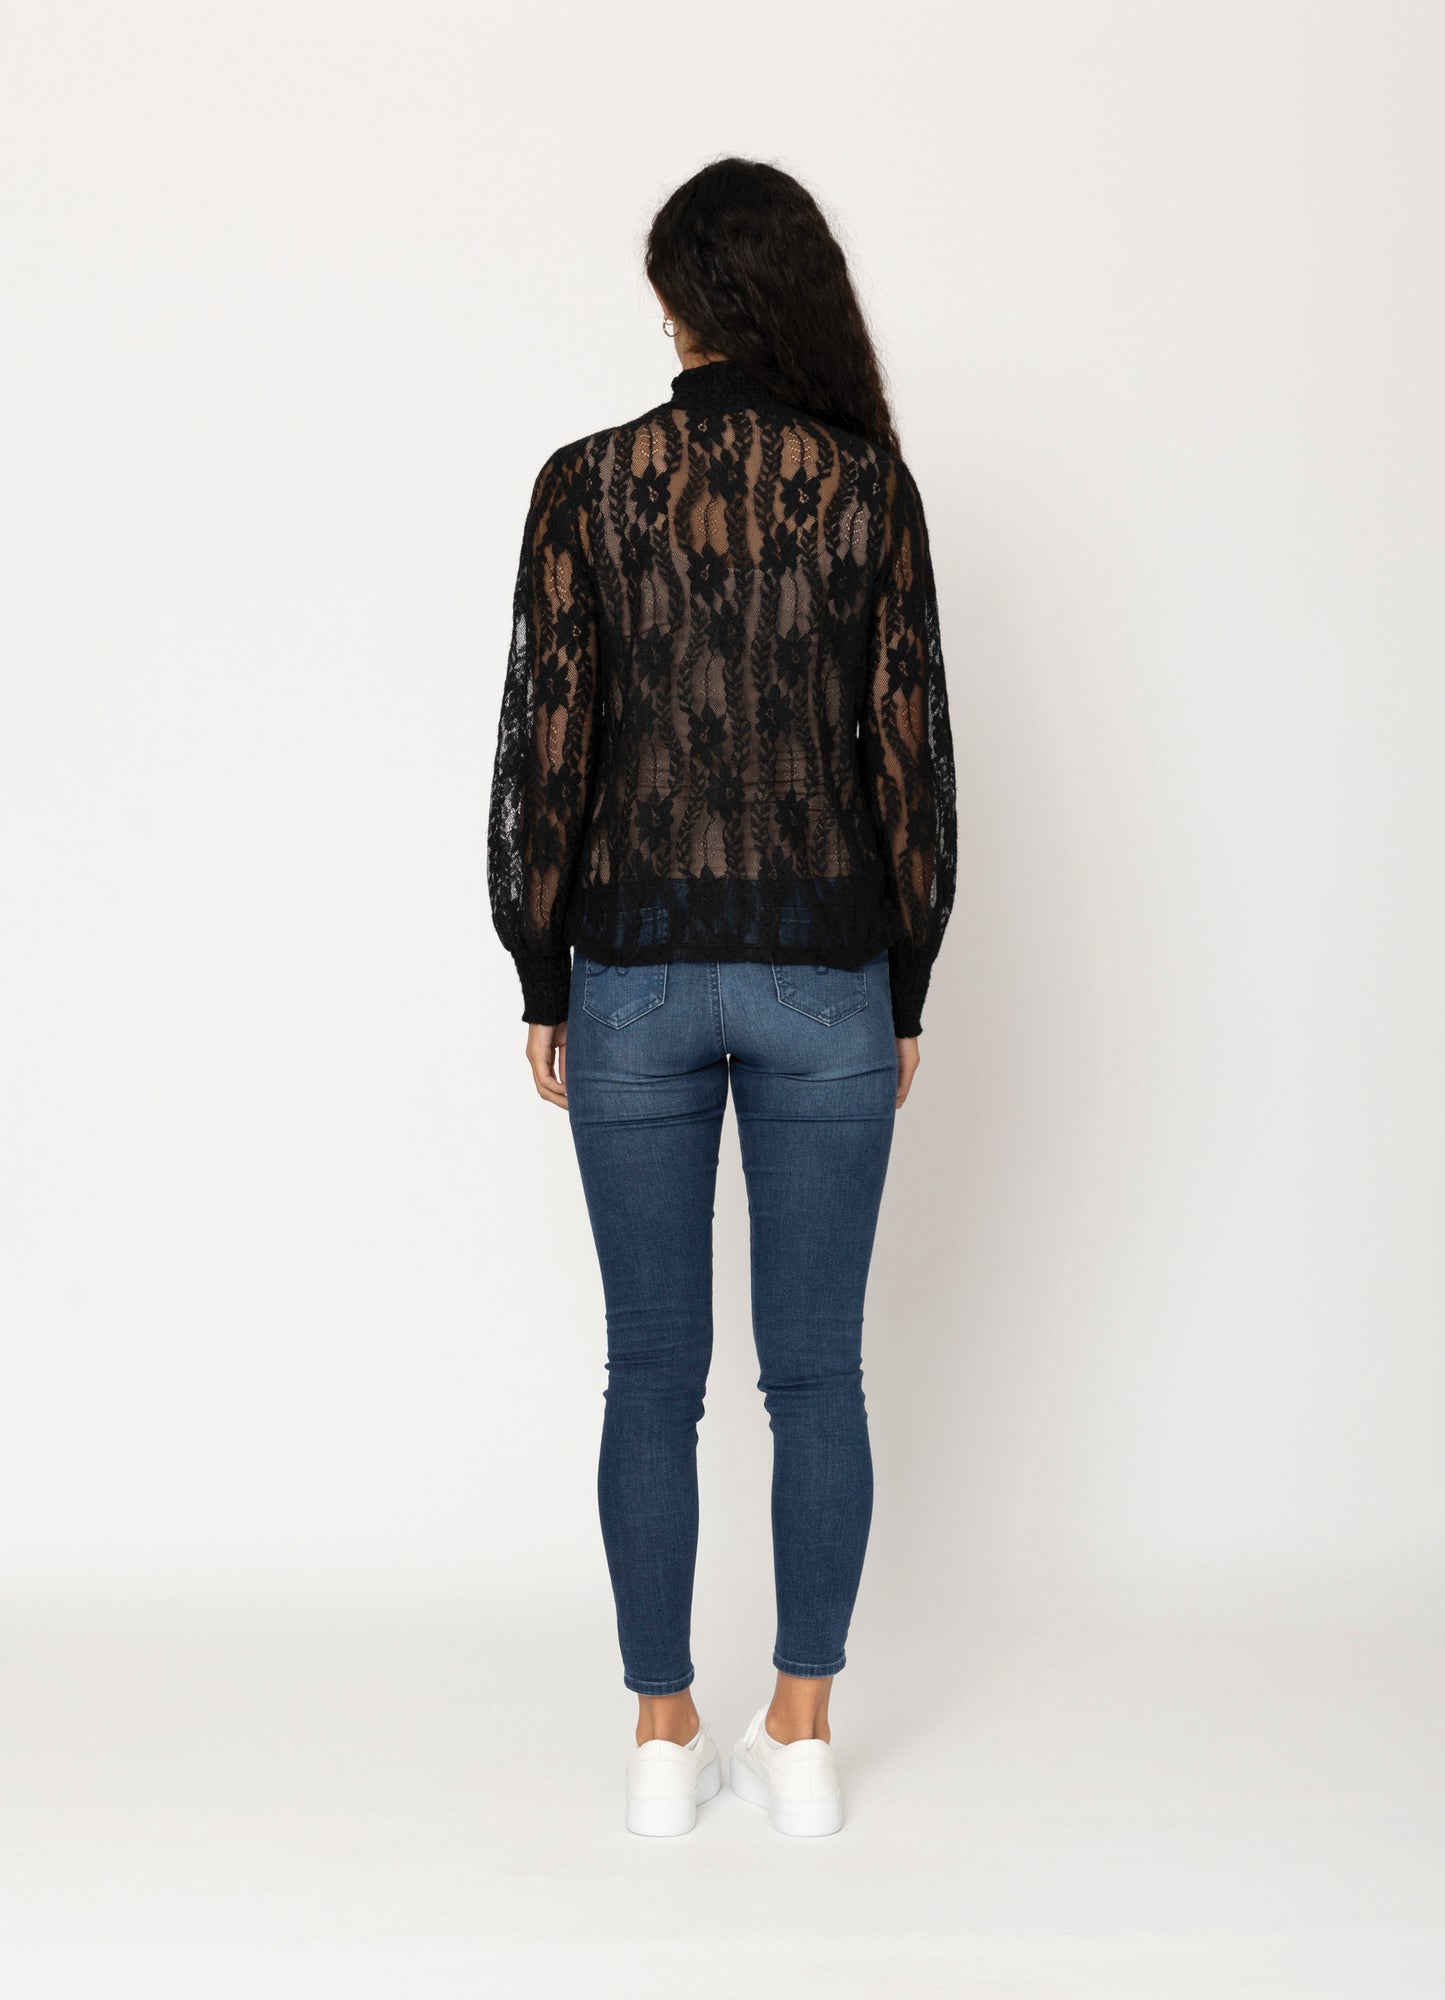 Lace Top